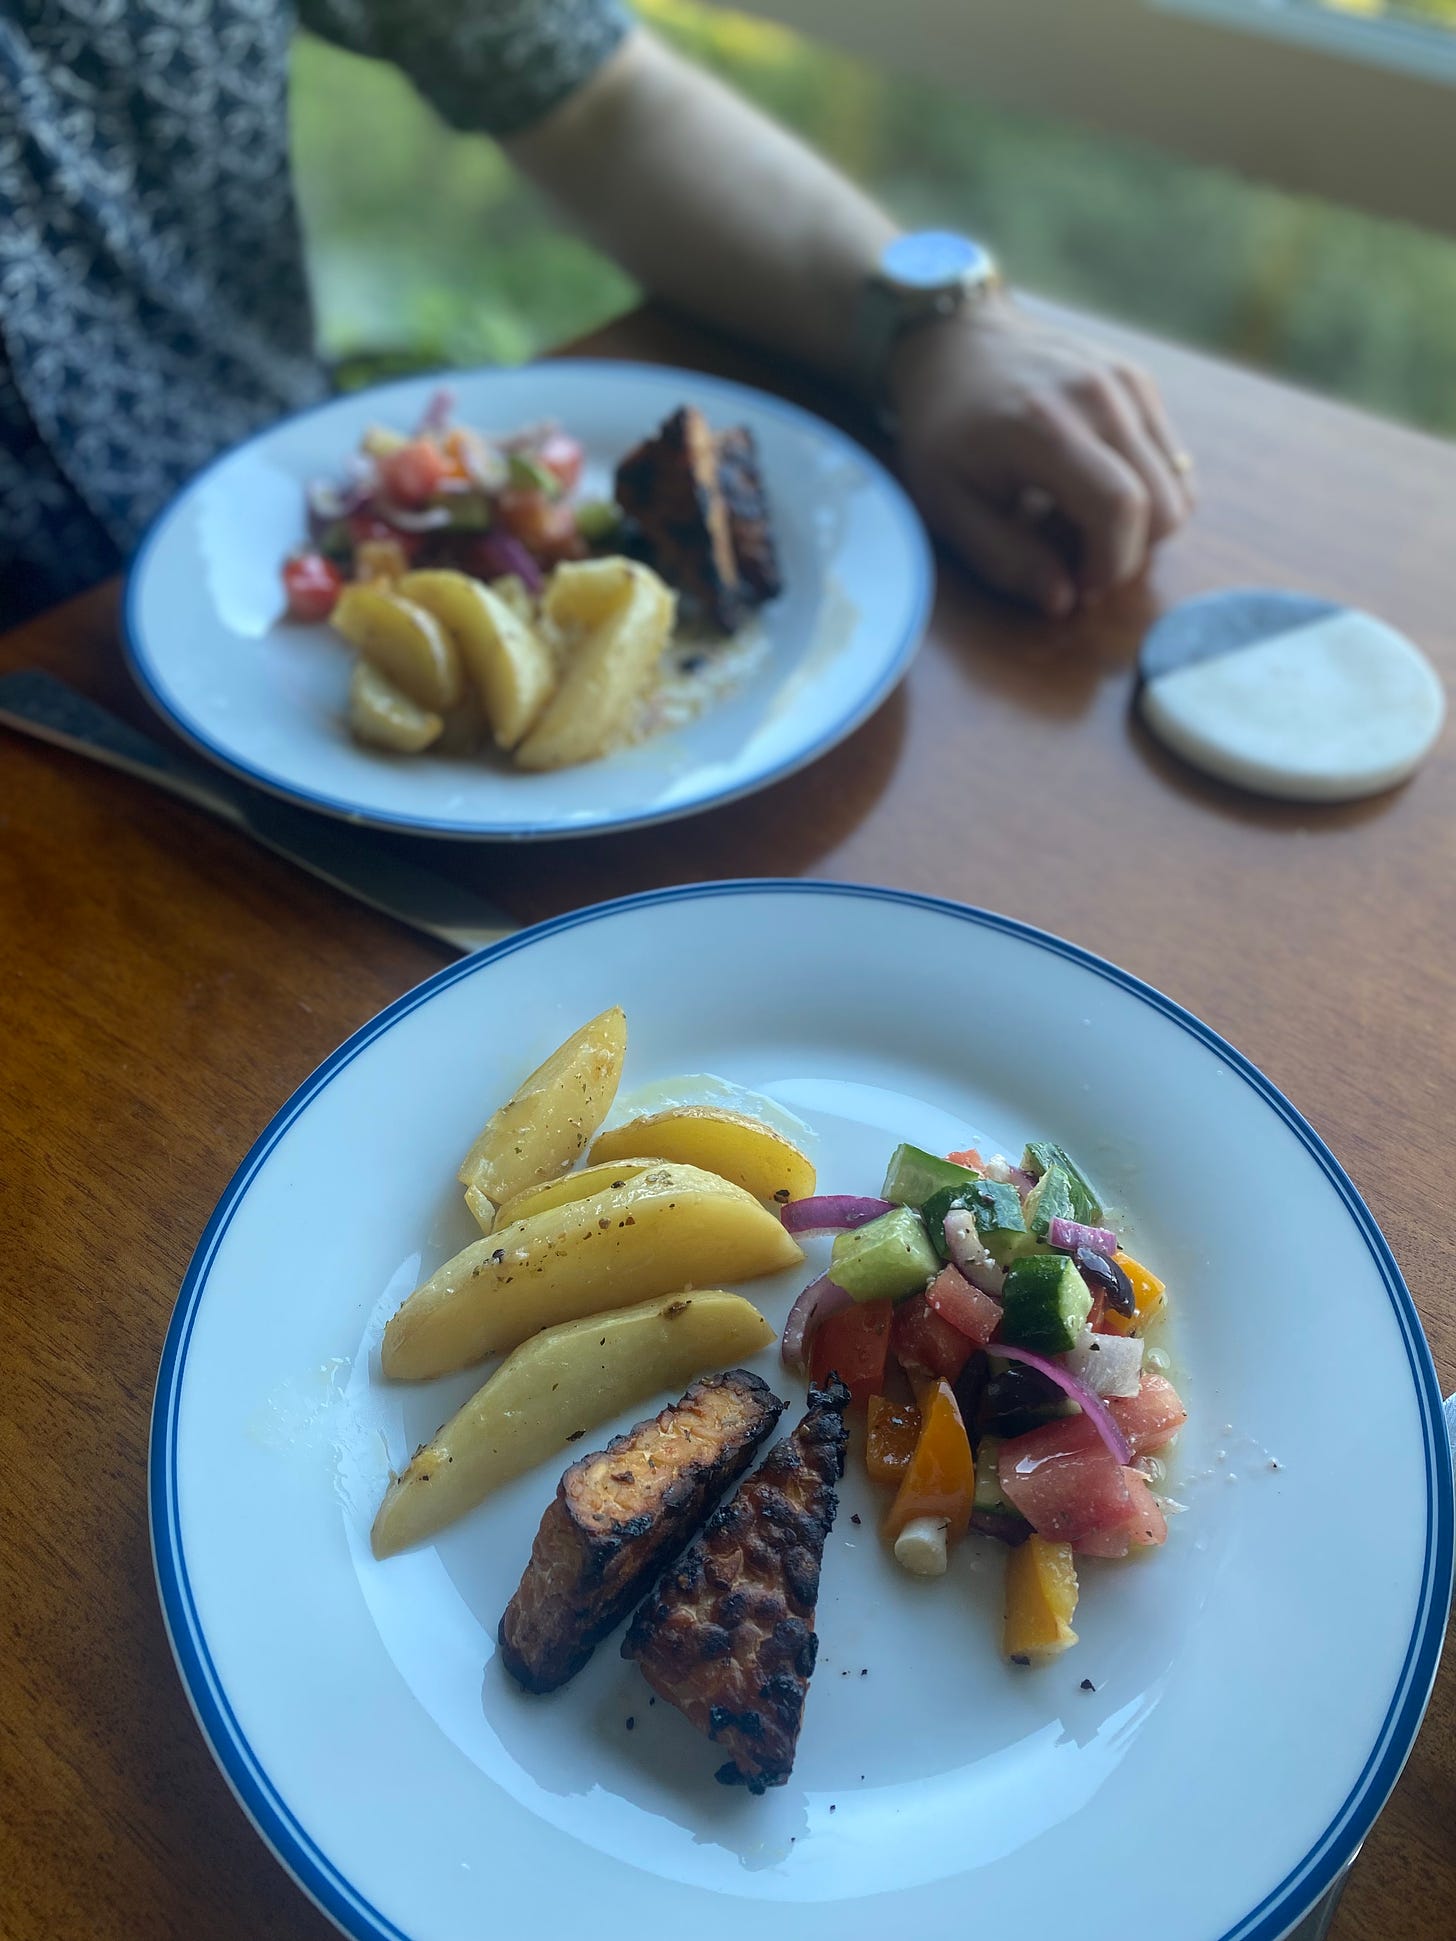 On a white plate with a blue rim, a few wedges of lemon potatoes and two triangles of blackened tempeh next to a small scoop of greek salad. Jeff's plate with the same is in the background, his hand resting next to the plate.